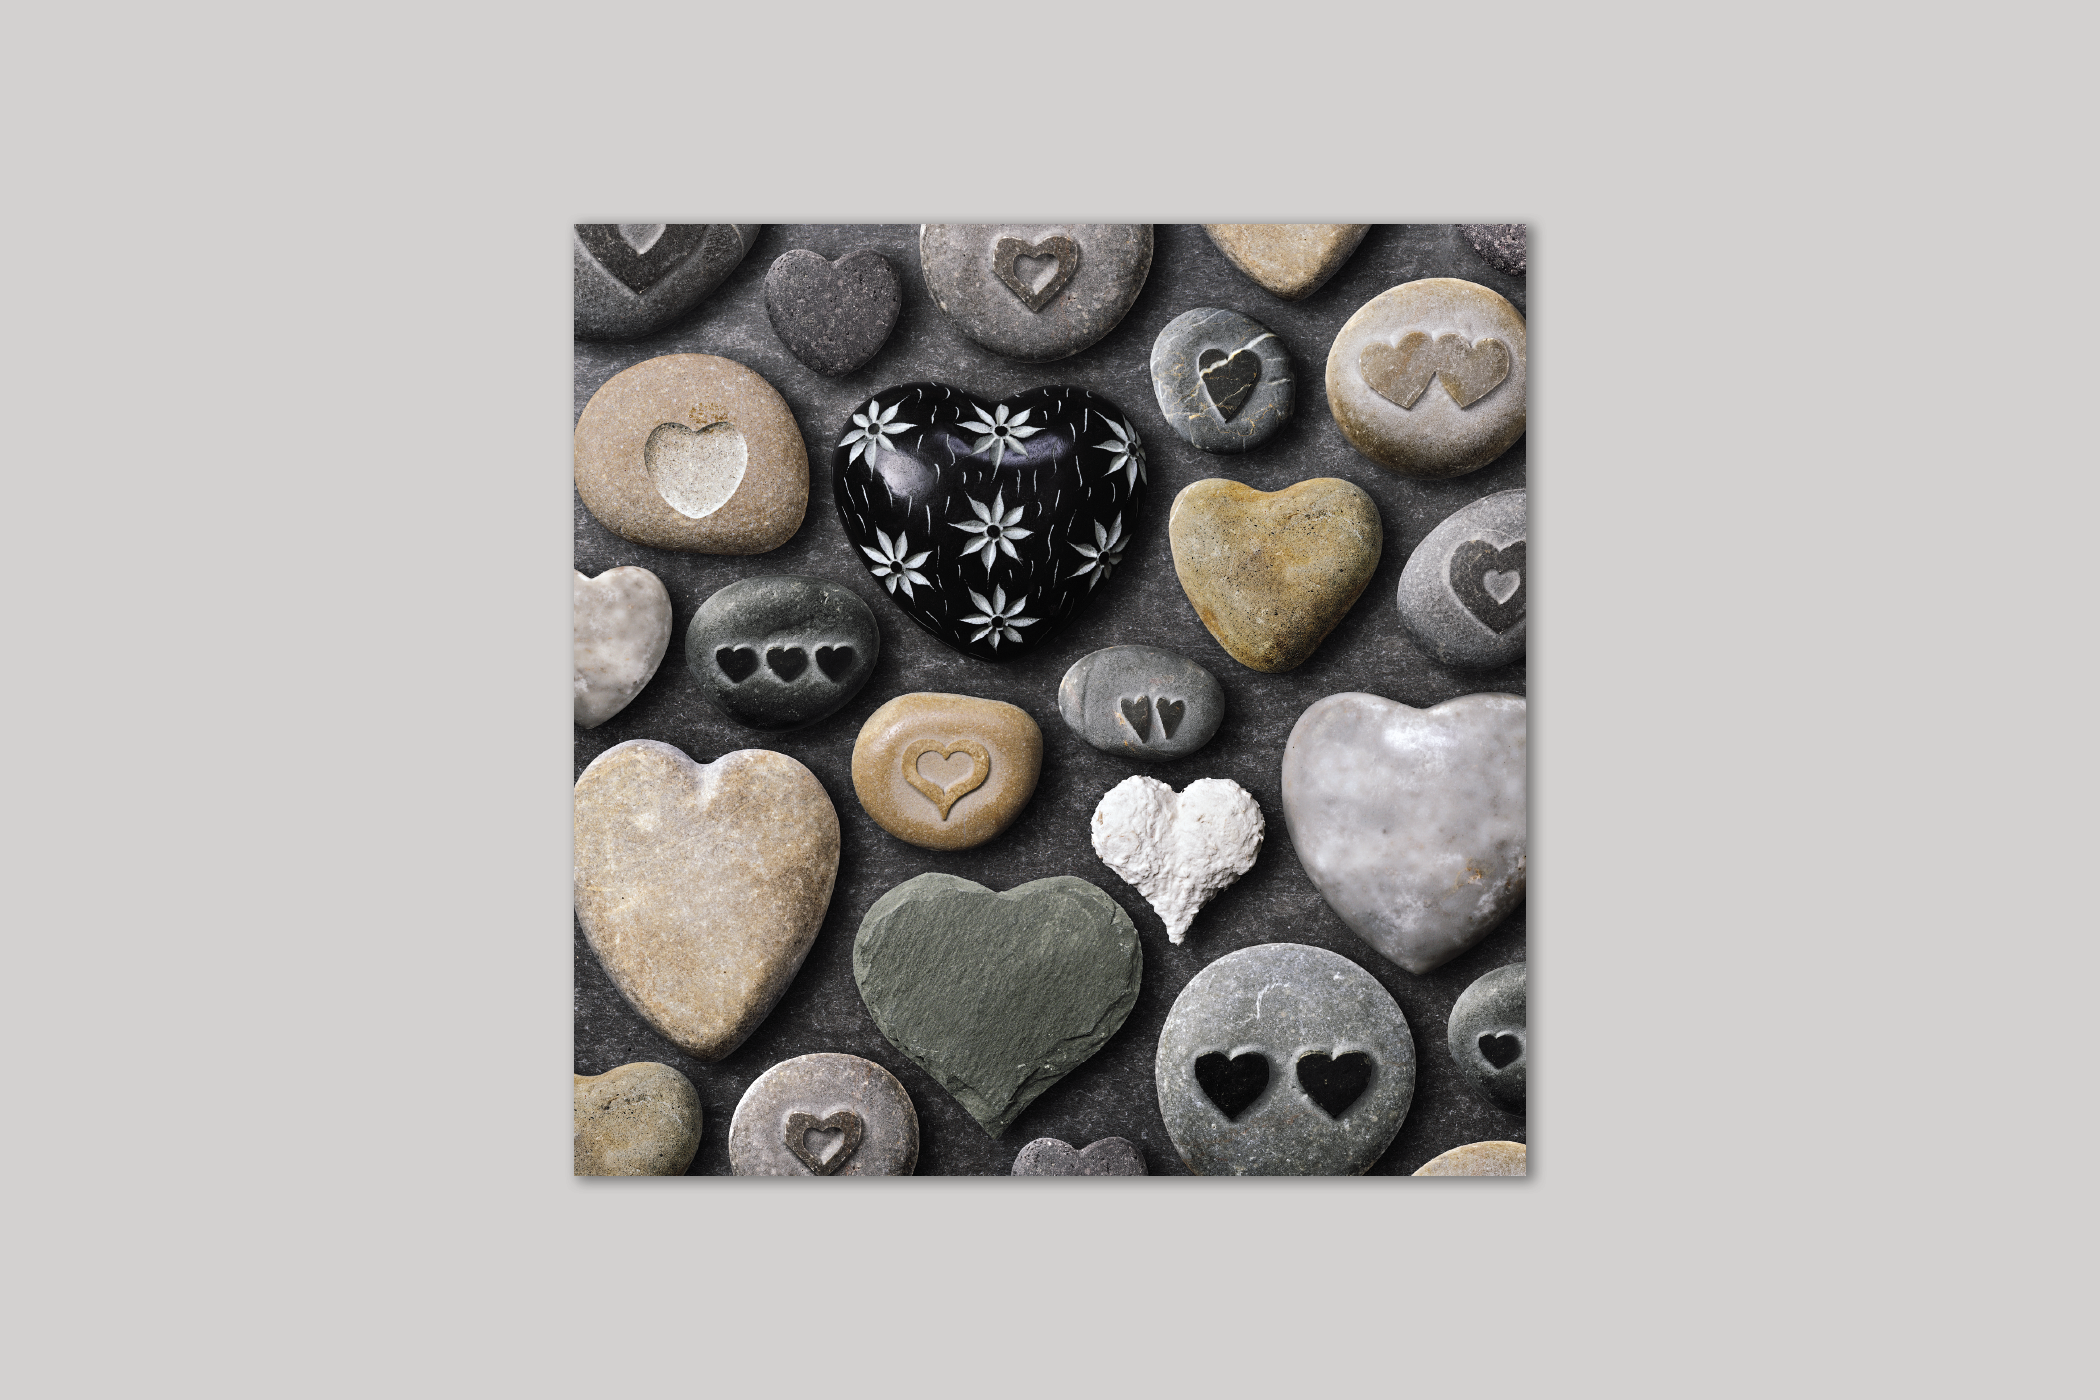 Love Rocks! from Exposure range of photographic cards by Icon.